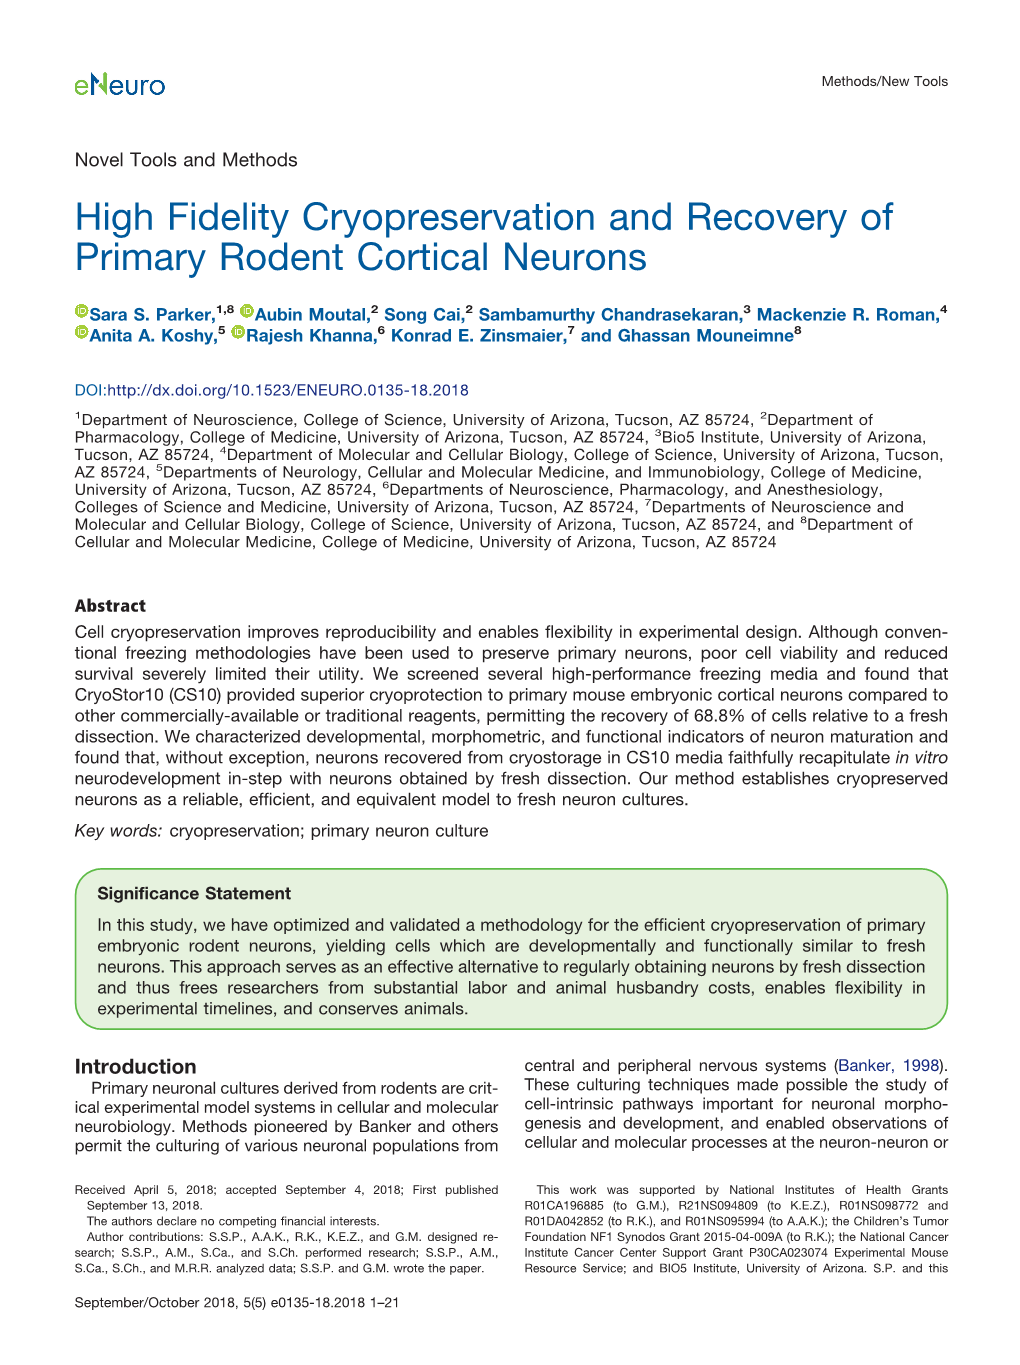 High Fidelity Cryopreservation and Recovery of Primary Rodent Cortical Neurons